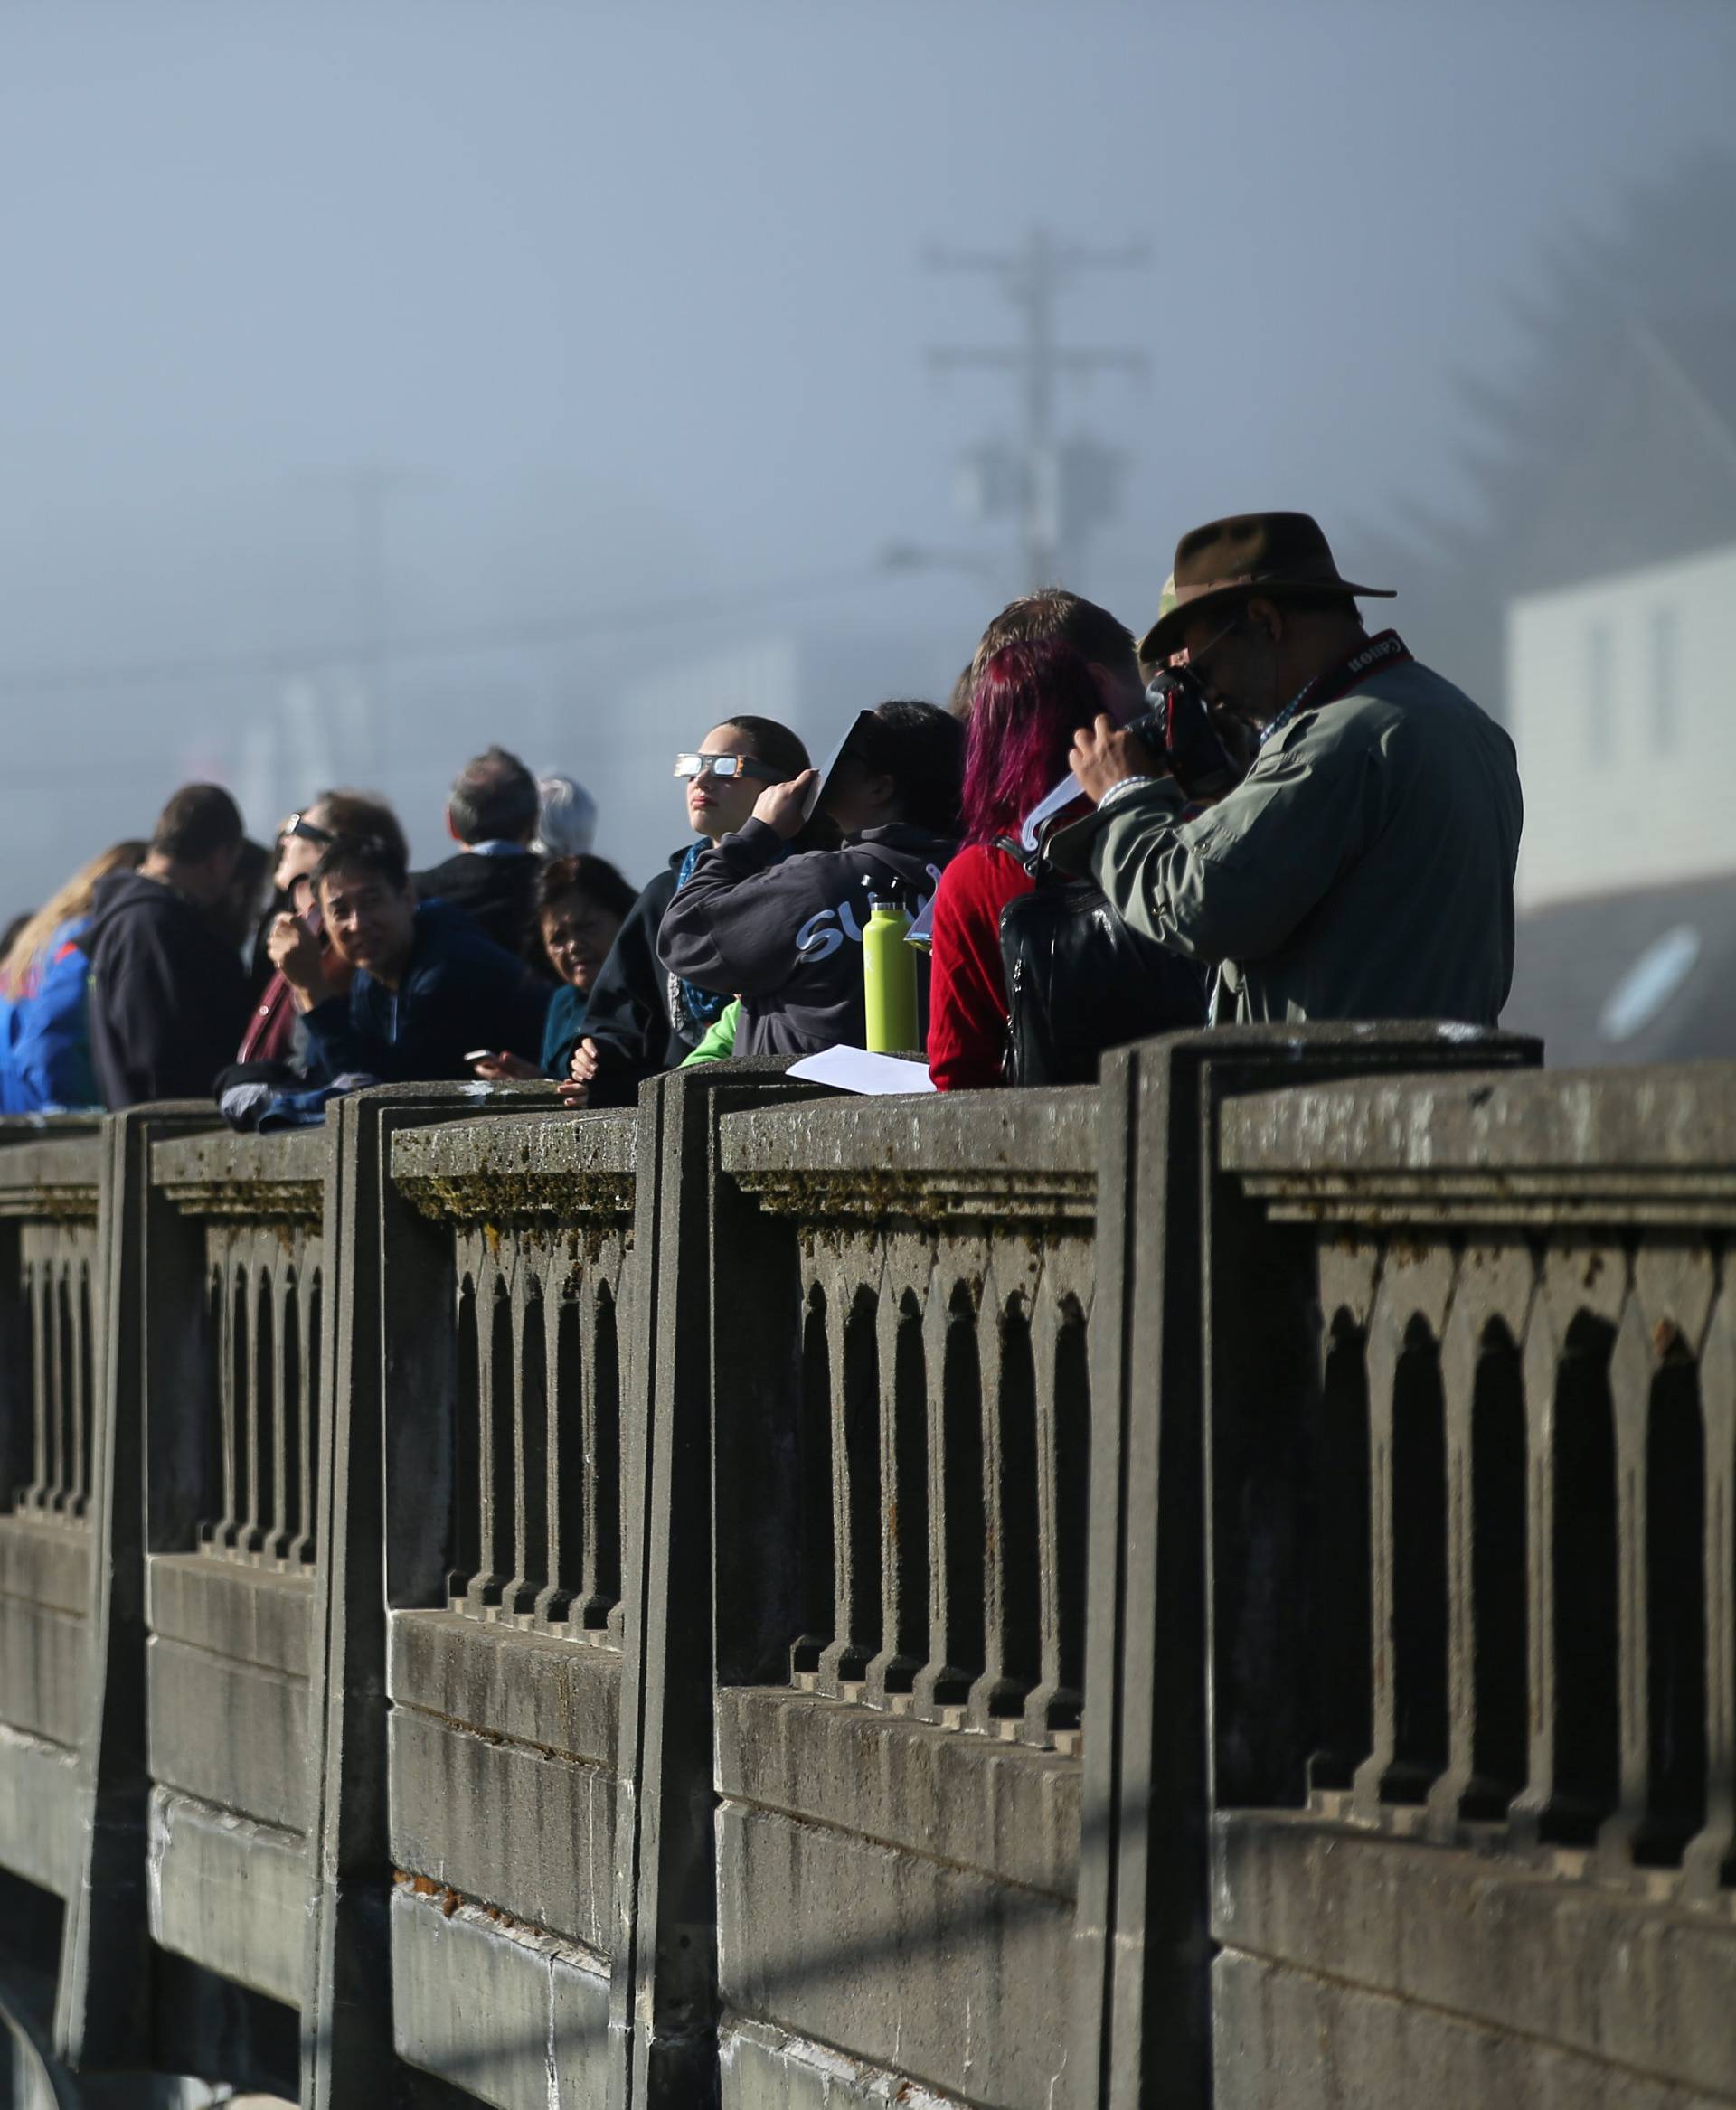 People line up on a bridge as the sun emerges through fog cover before the solar eclipse in Depoe Bay